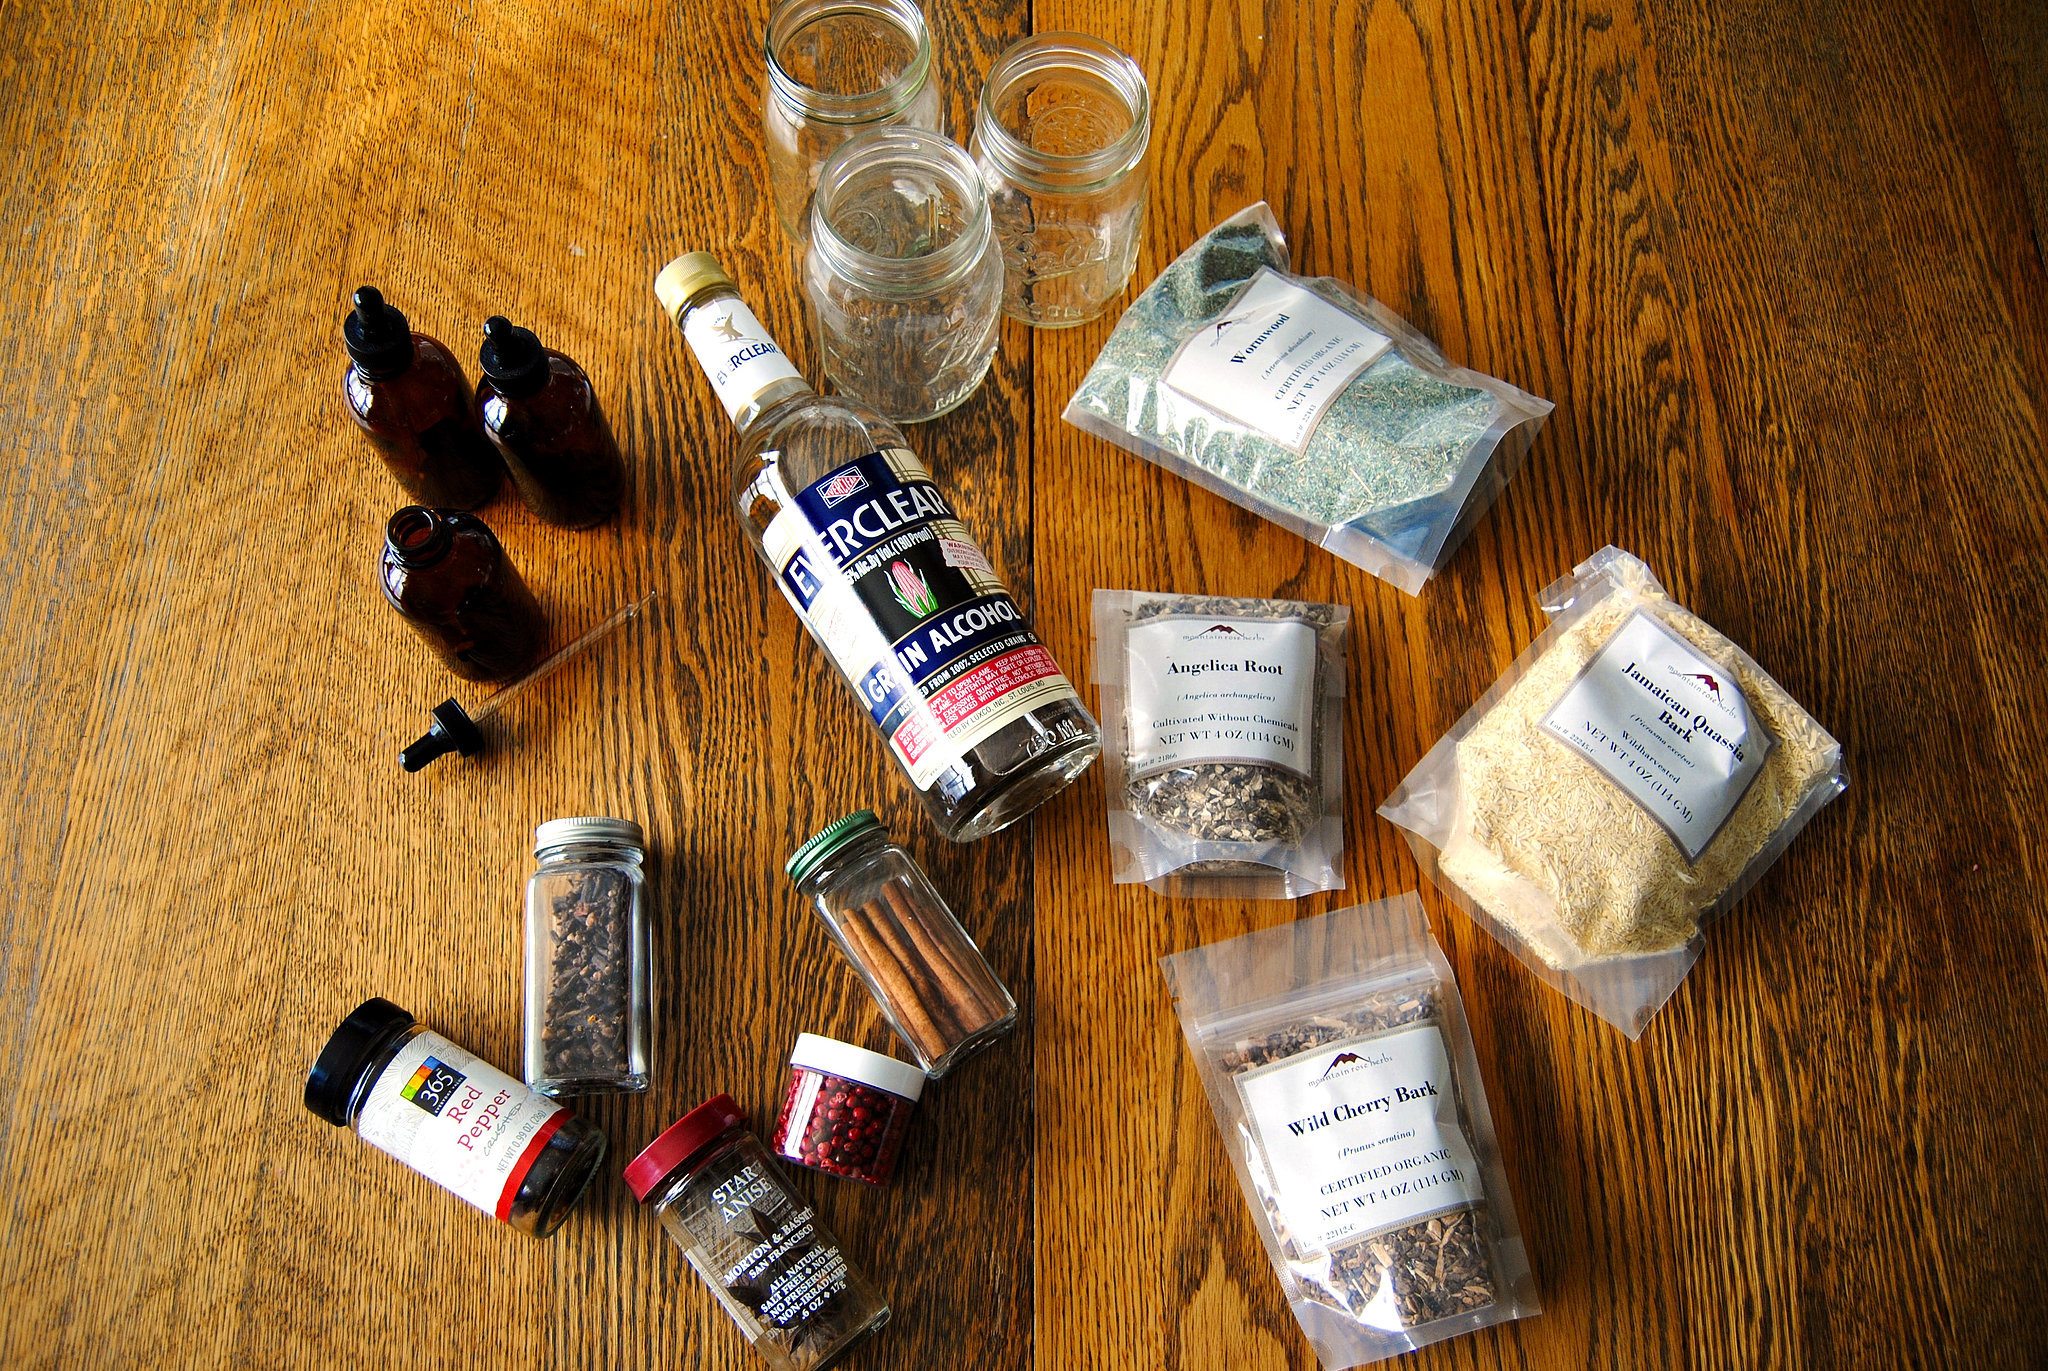 DIY Gin-Making Alcohol Infusion-Kit, Featured in Vogue, 12 Spices in  Glass